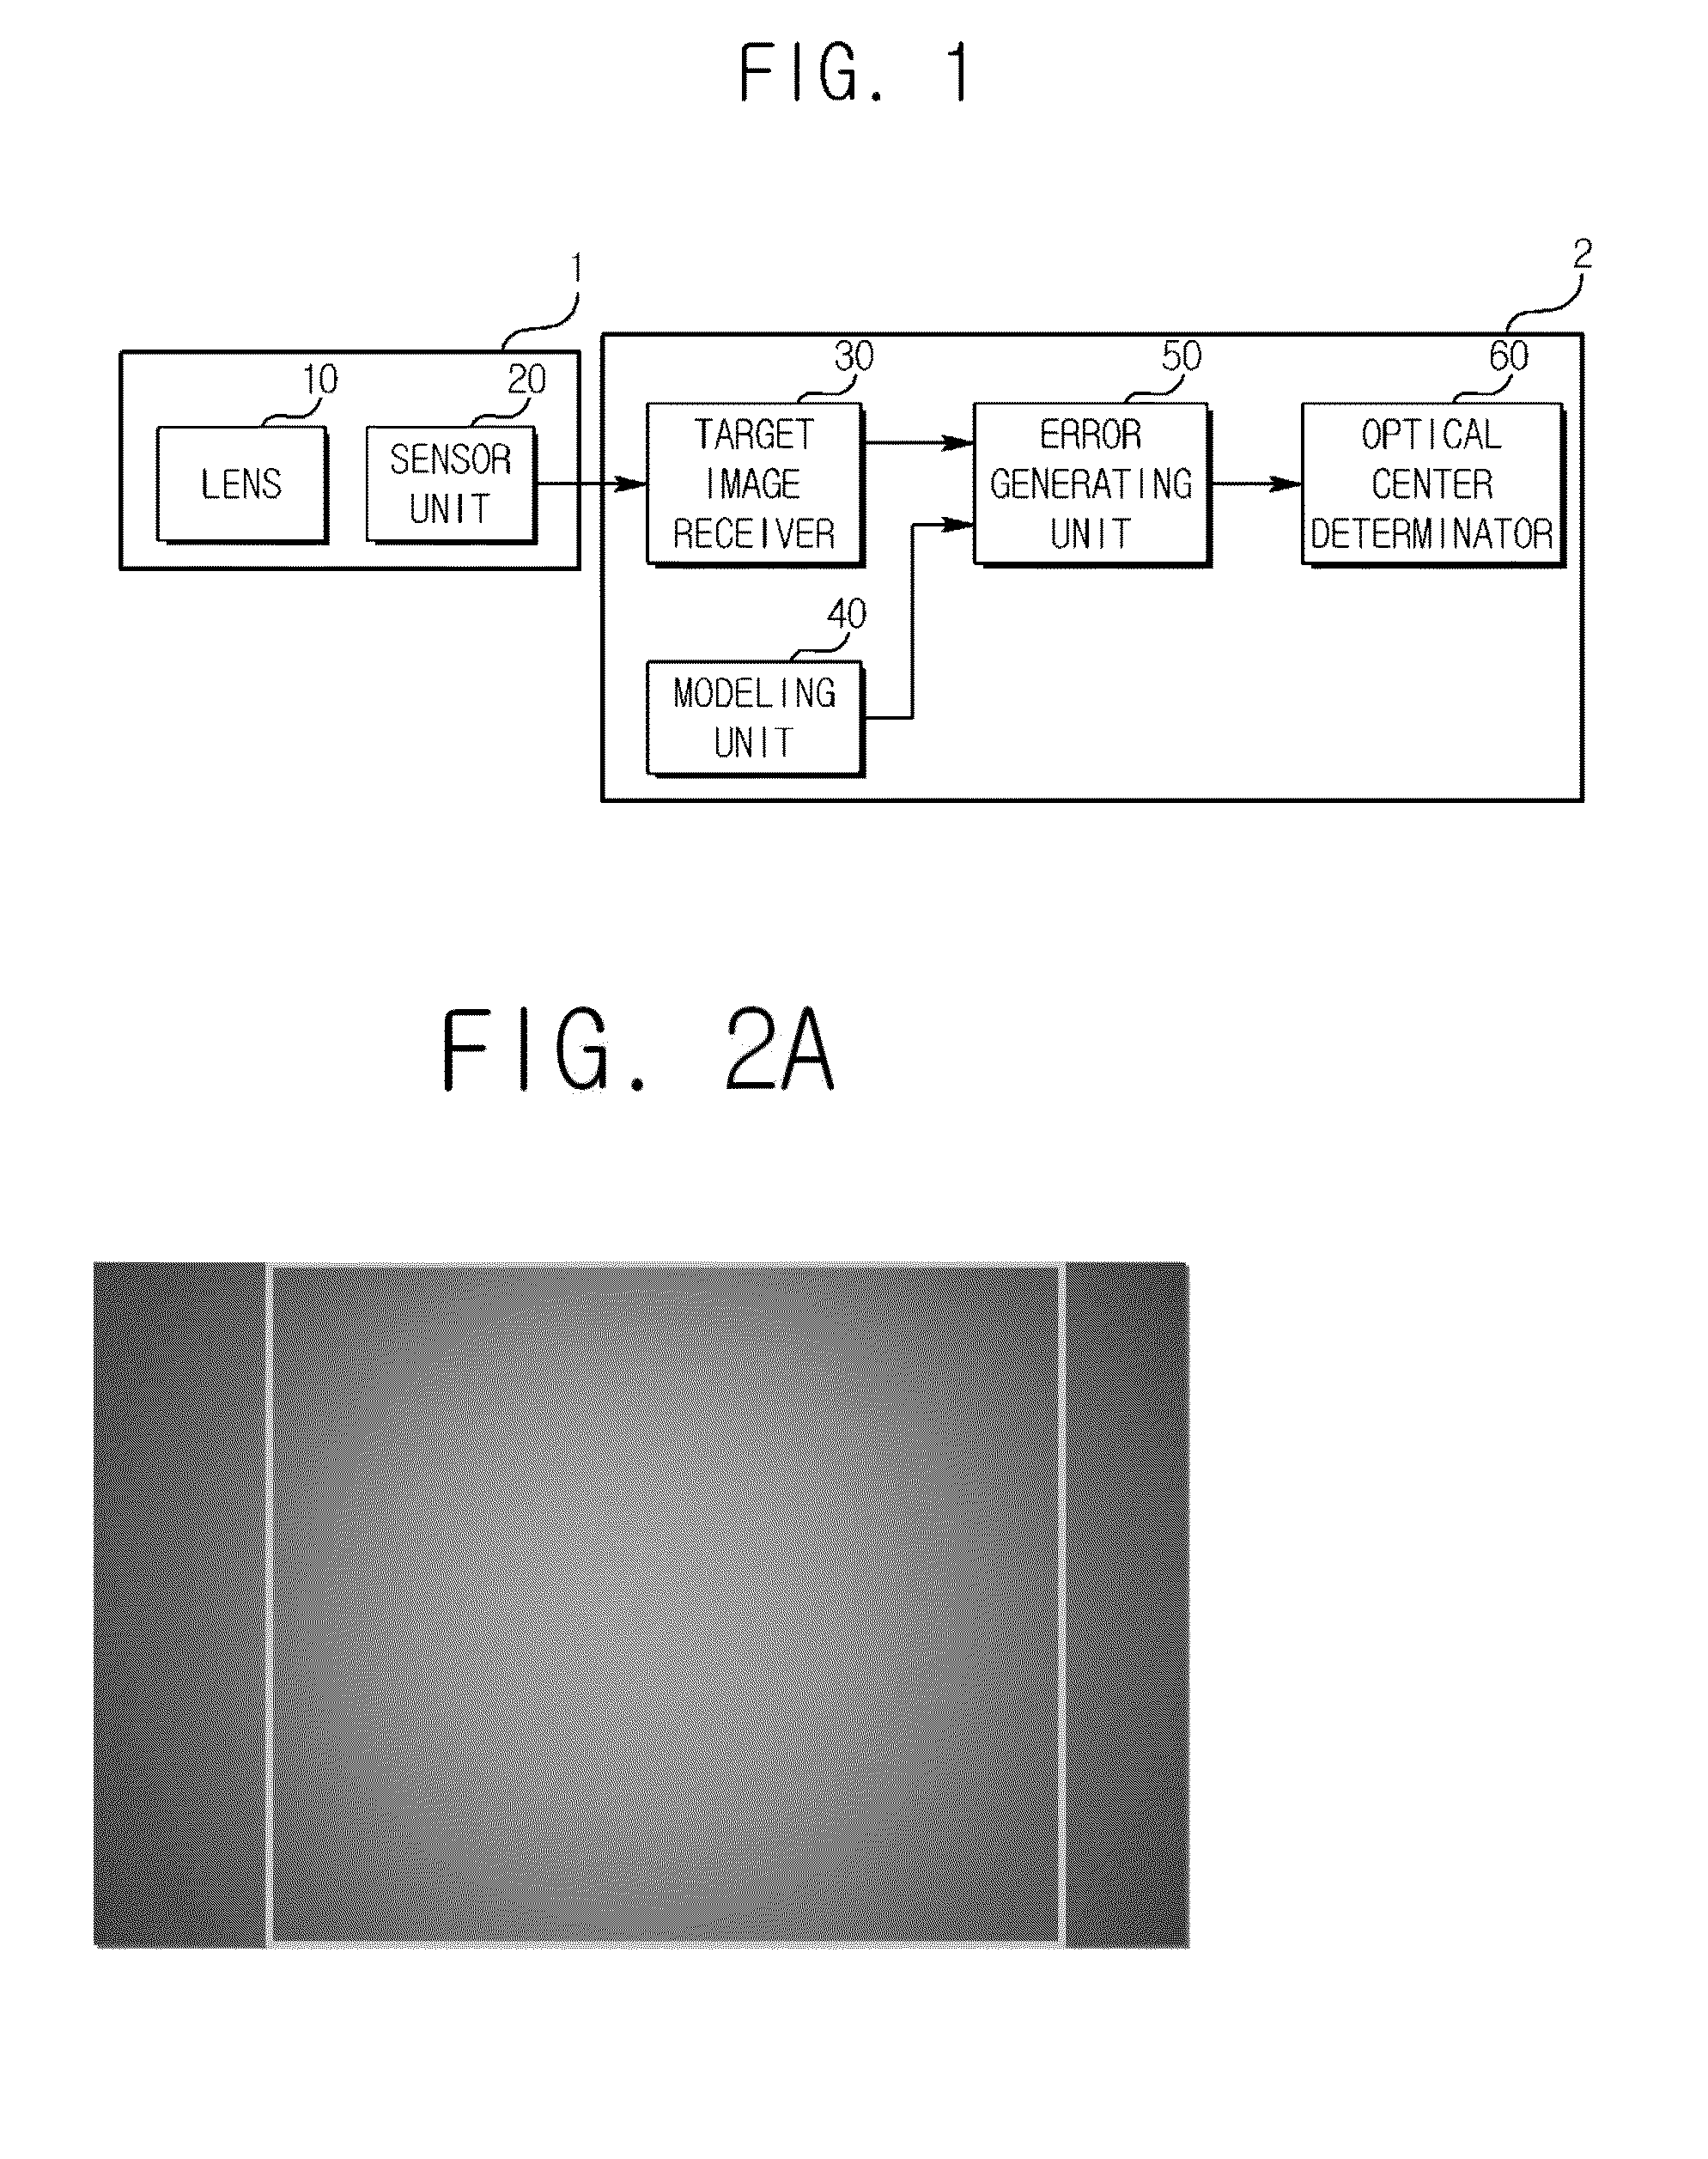 Apparatus and method for determining optical center in camera module